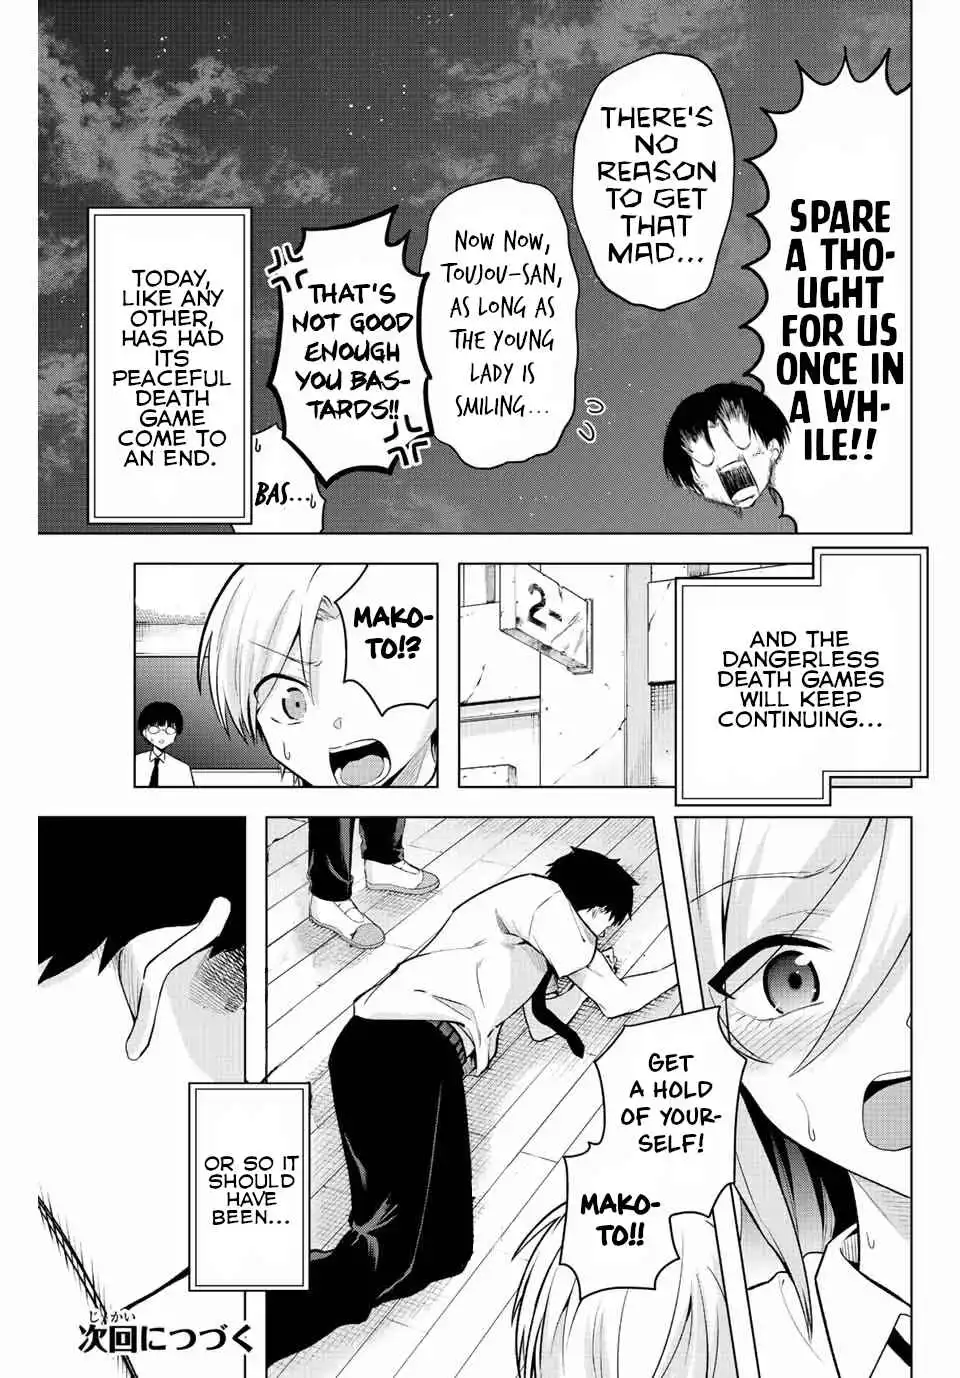 The death game is all that Saotome-san has left Chapter 11